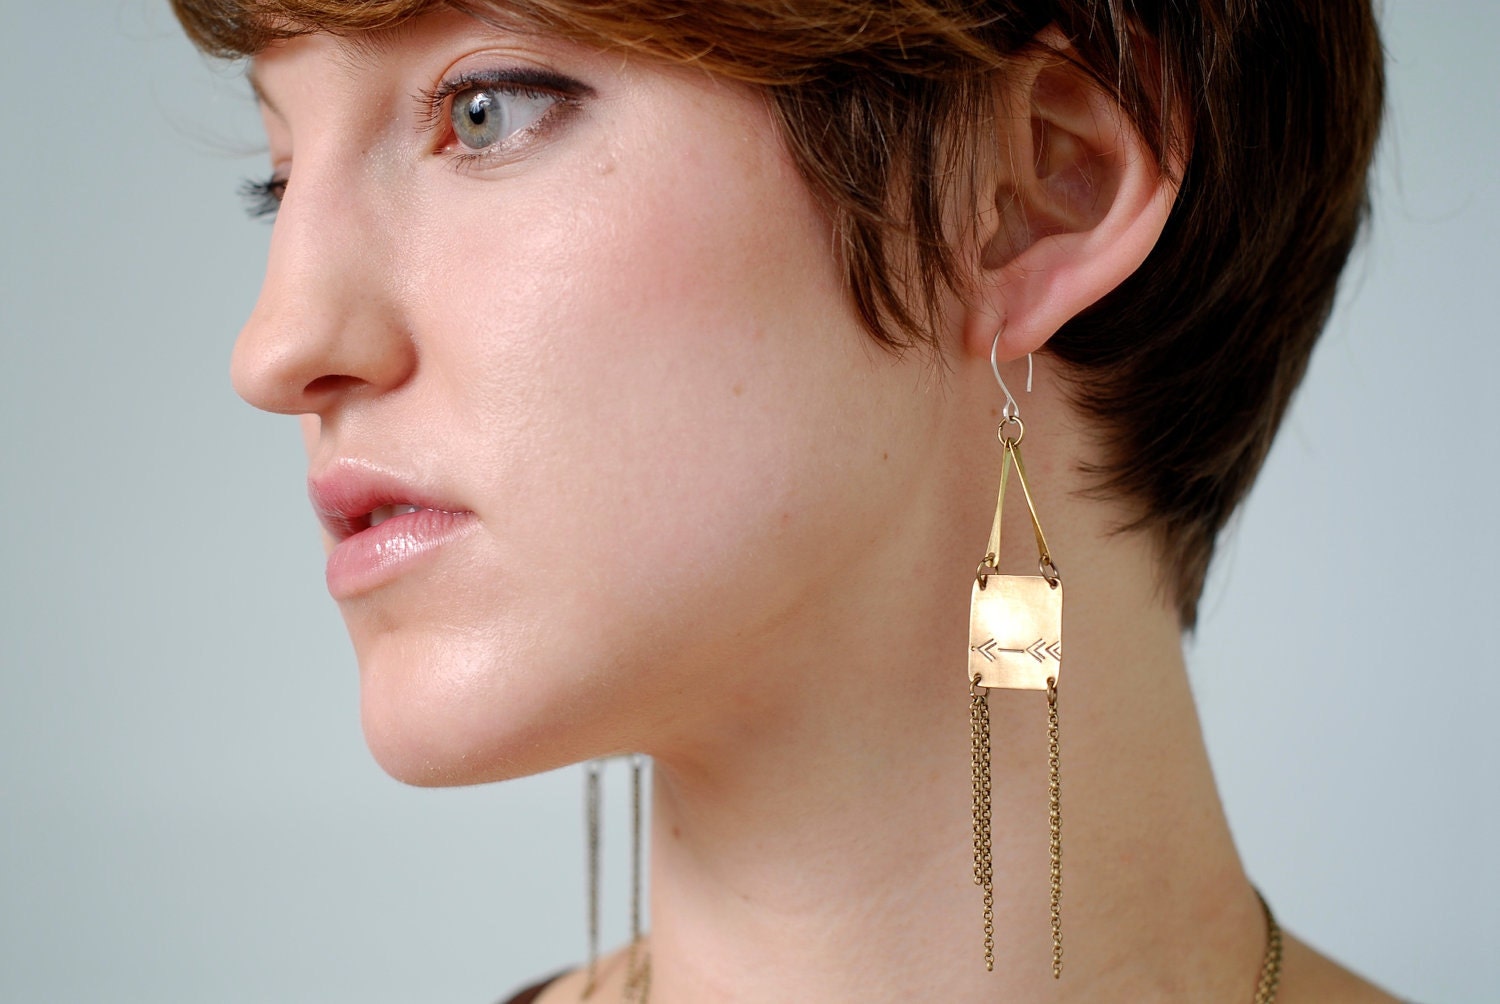 Sights are Set Brass Square and Arrow Earrings